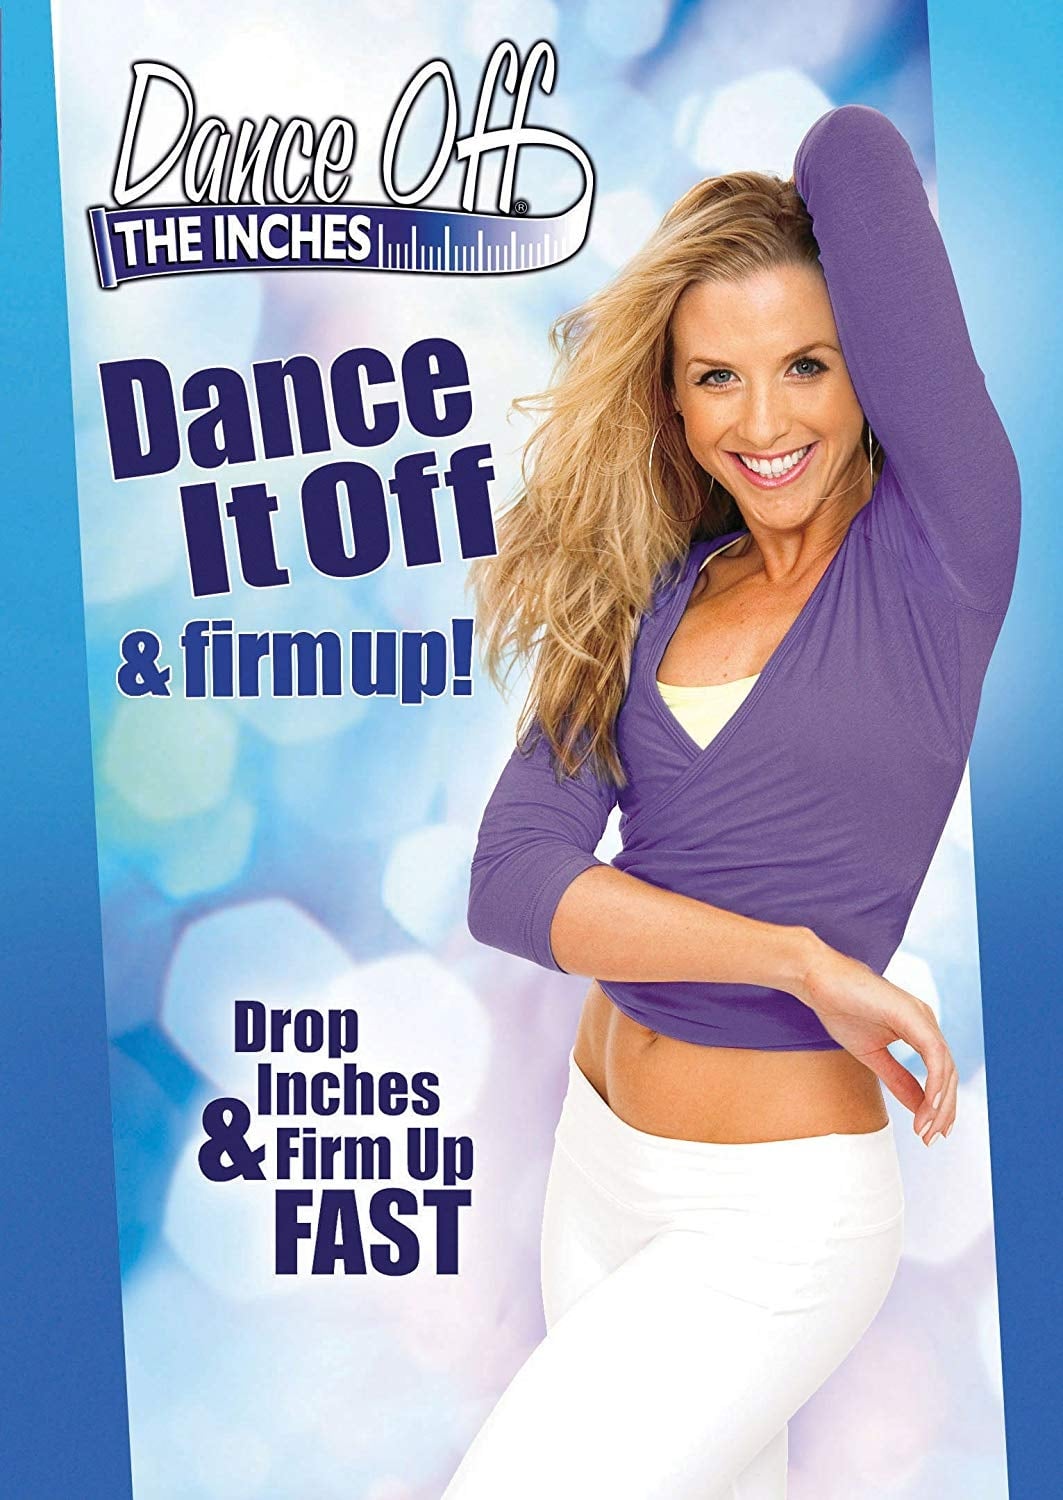 Dance Off The Inches: Dance It Off & Firm Up